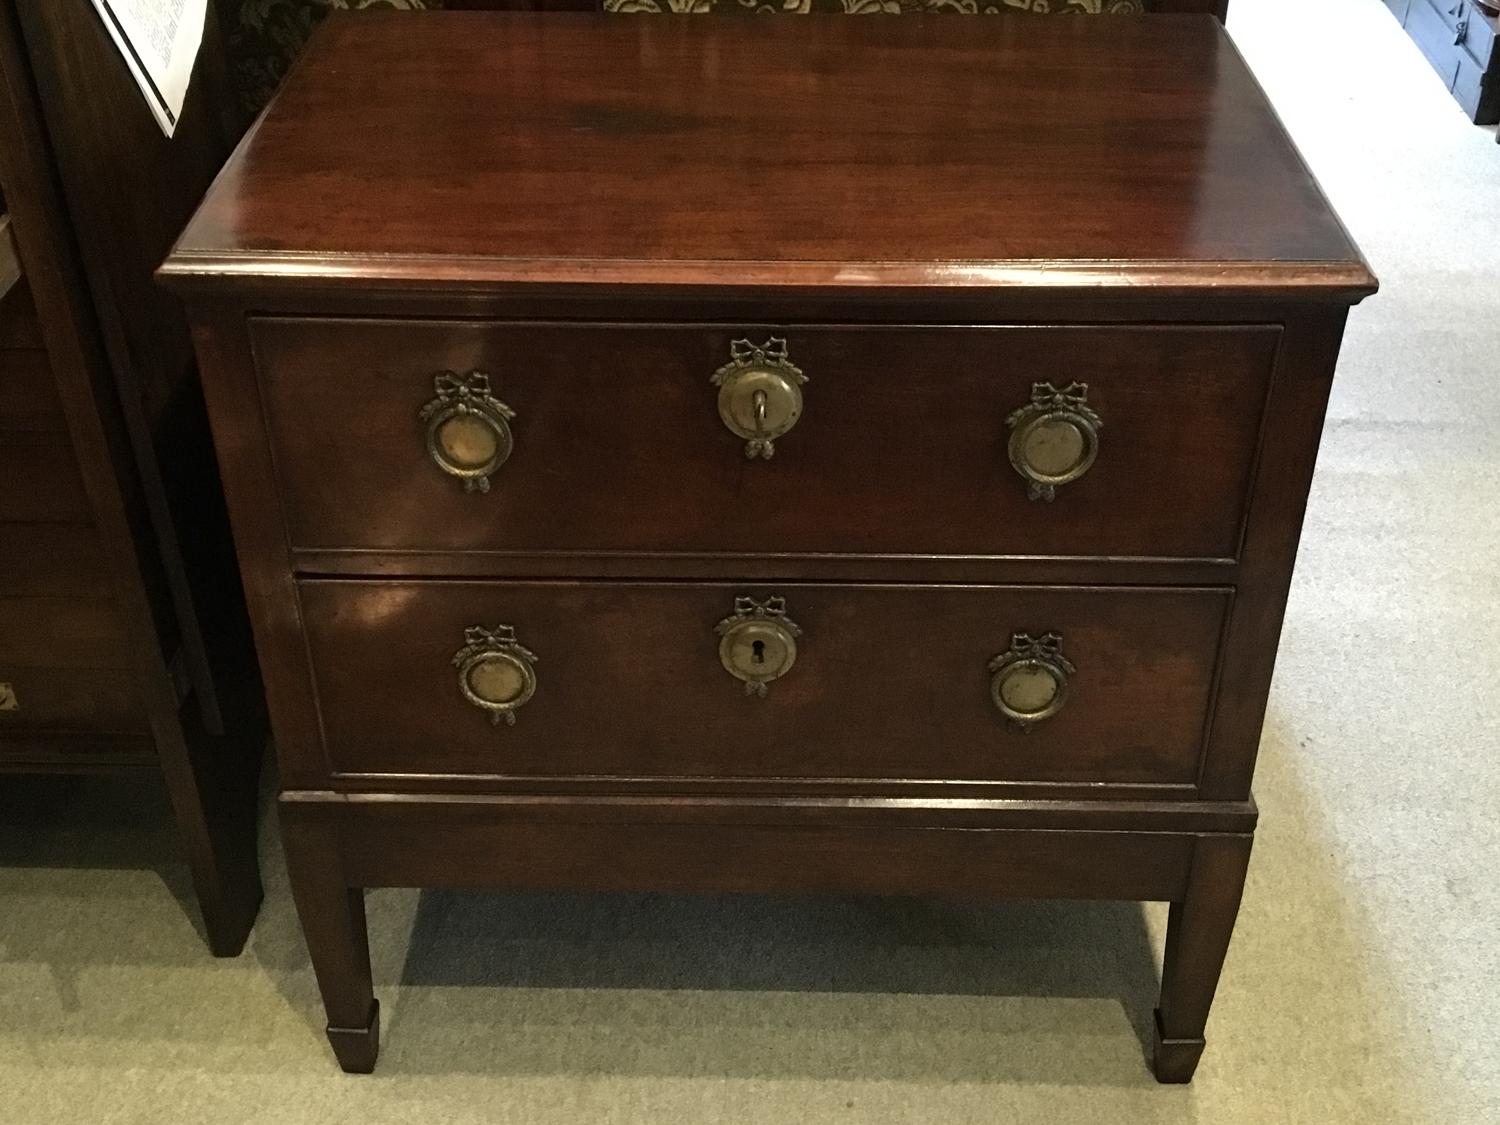 Two drawer chest on stand